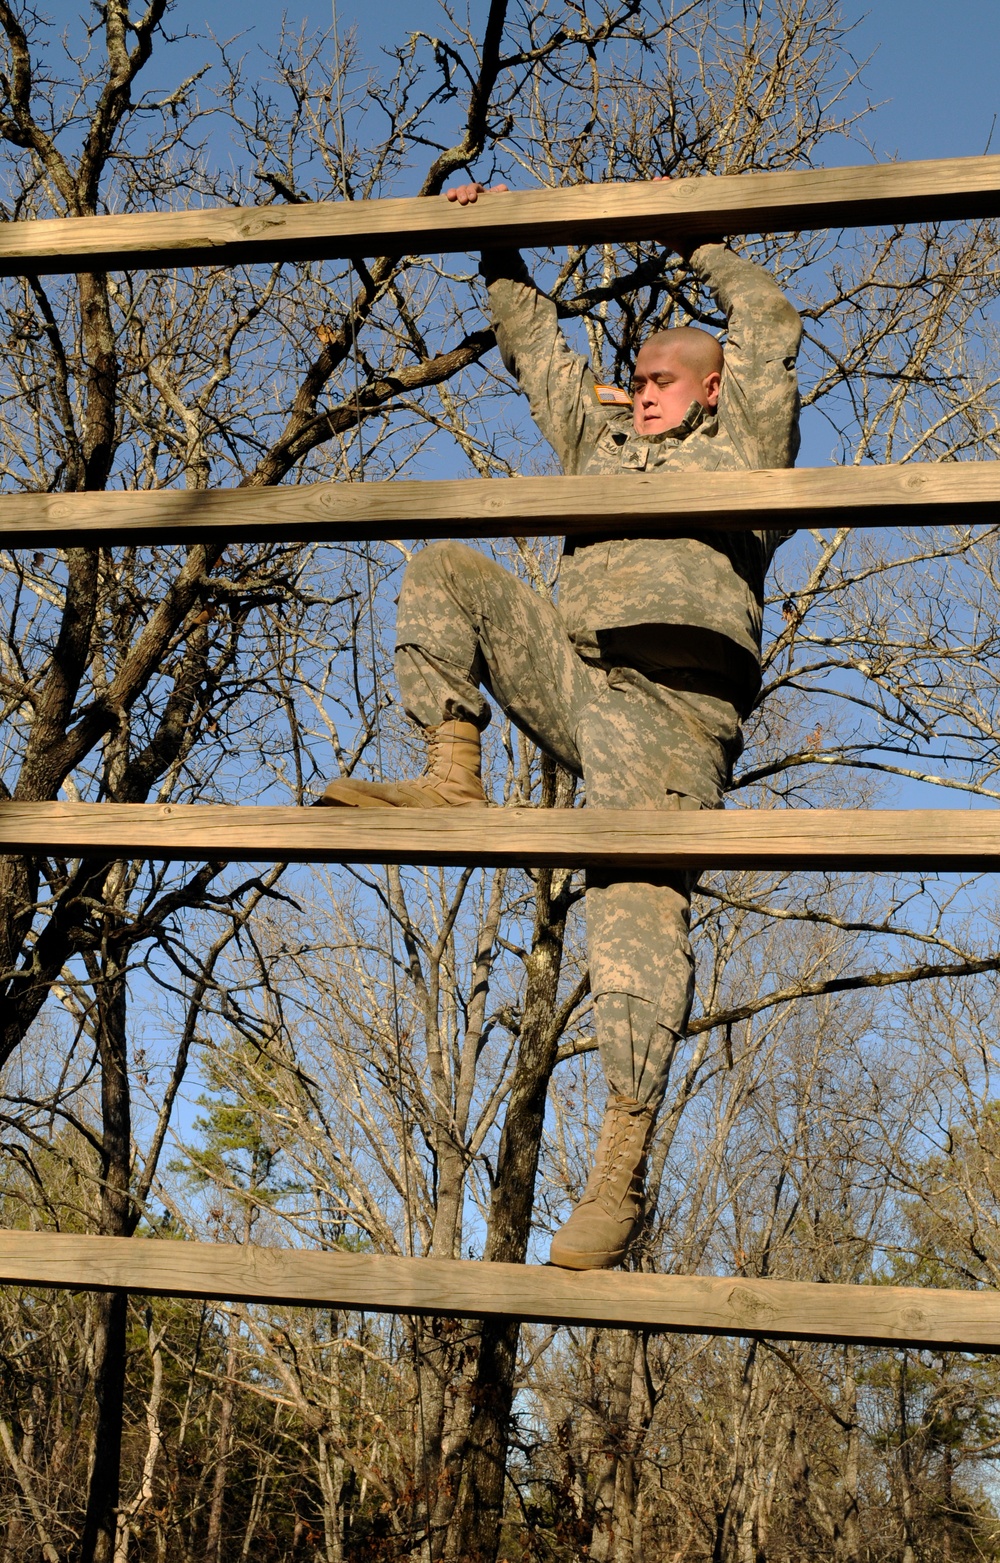 Reserve Soldiers push through their limits